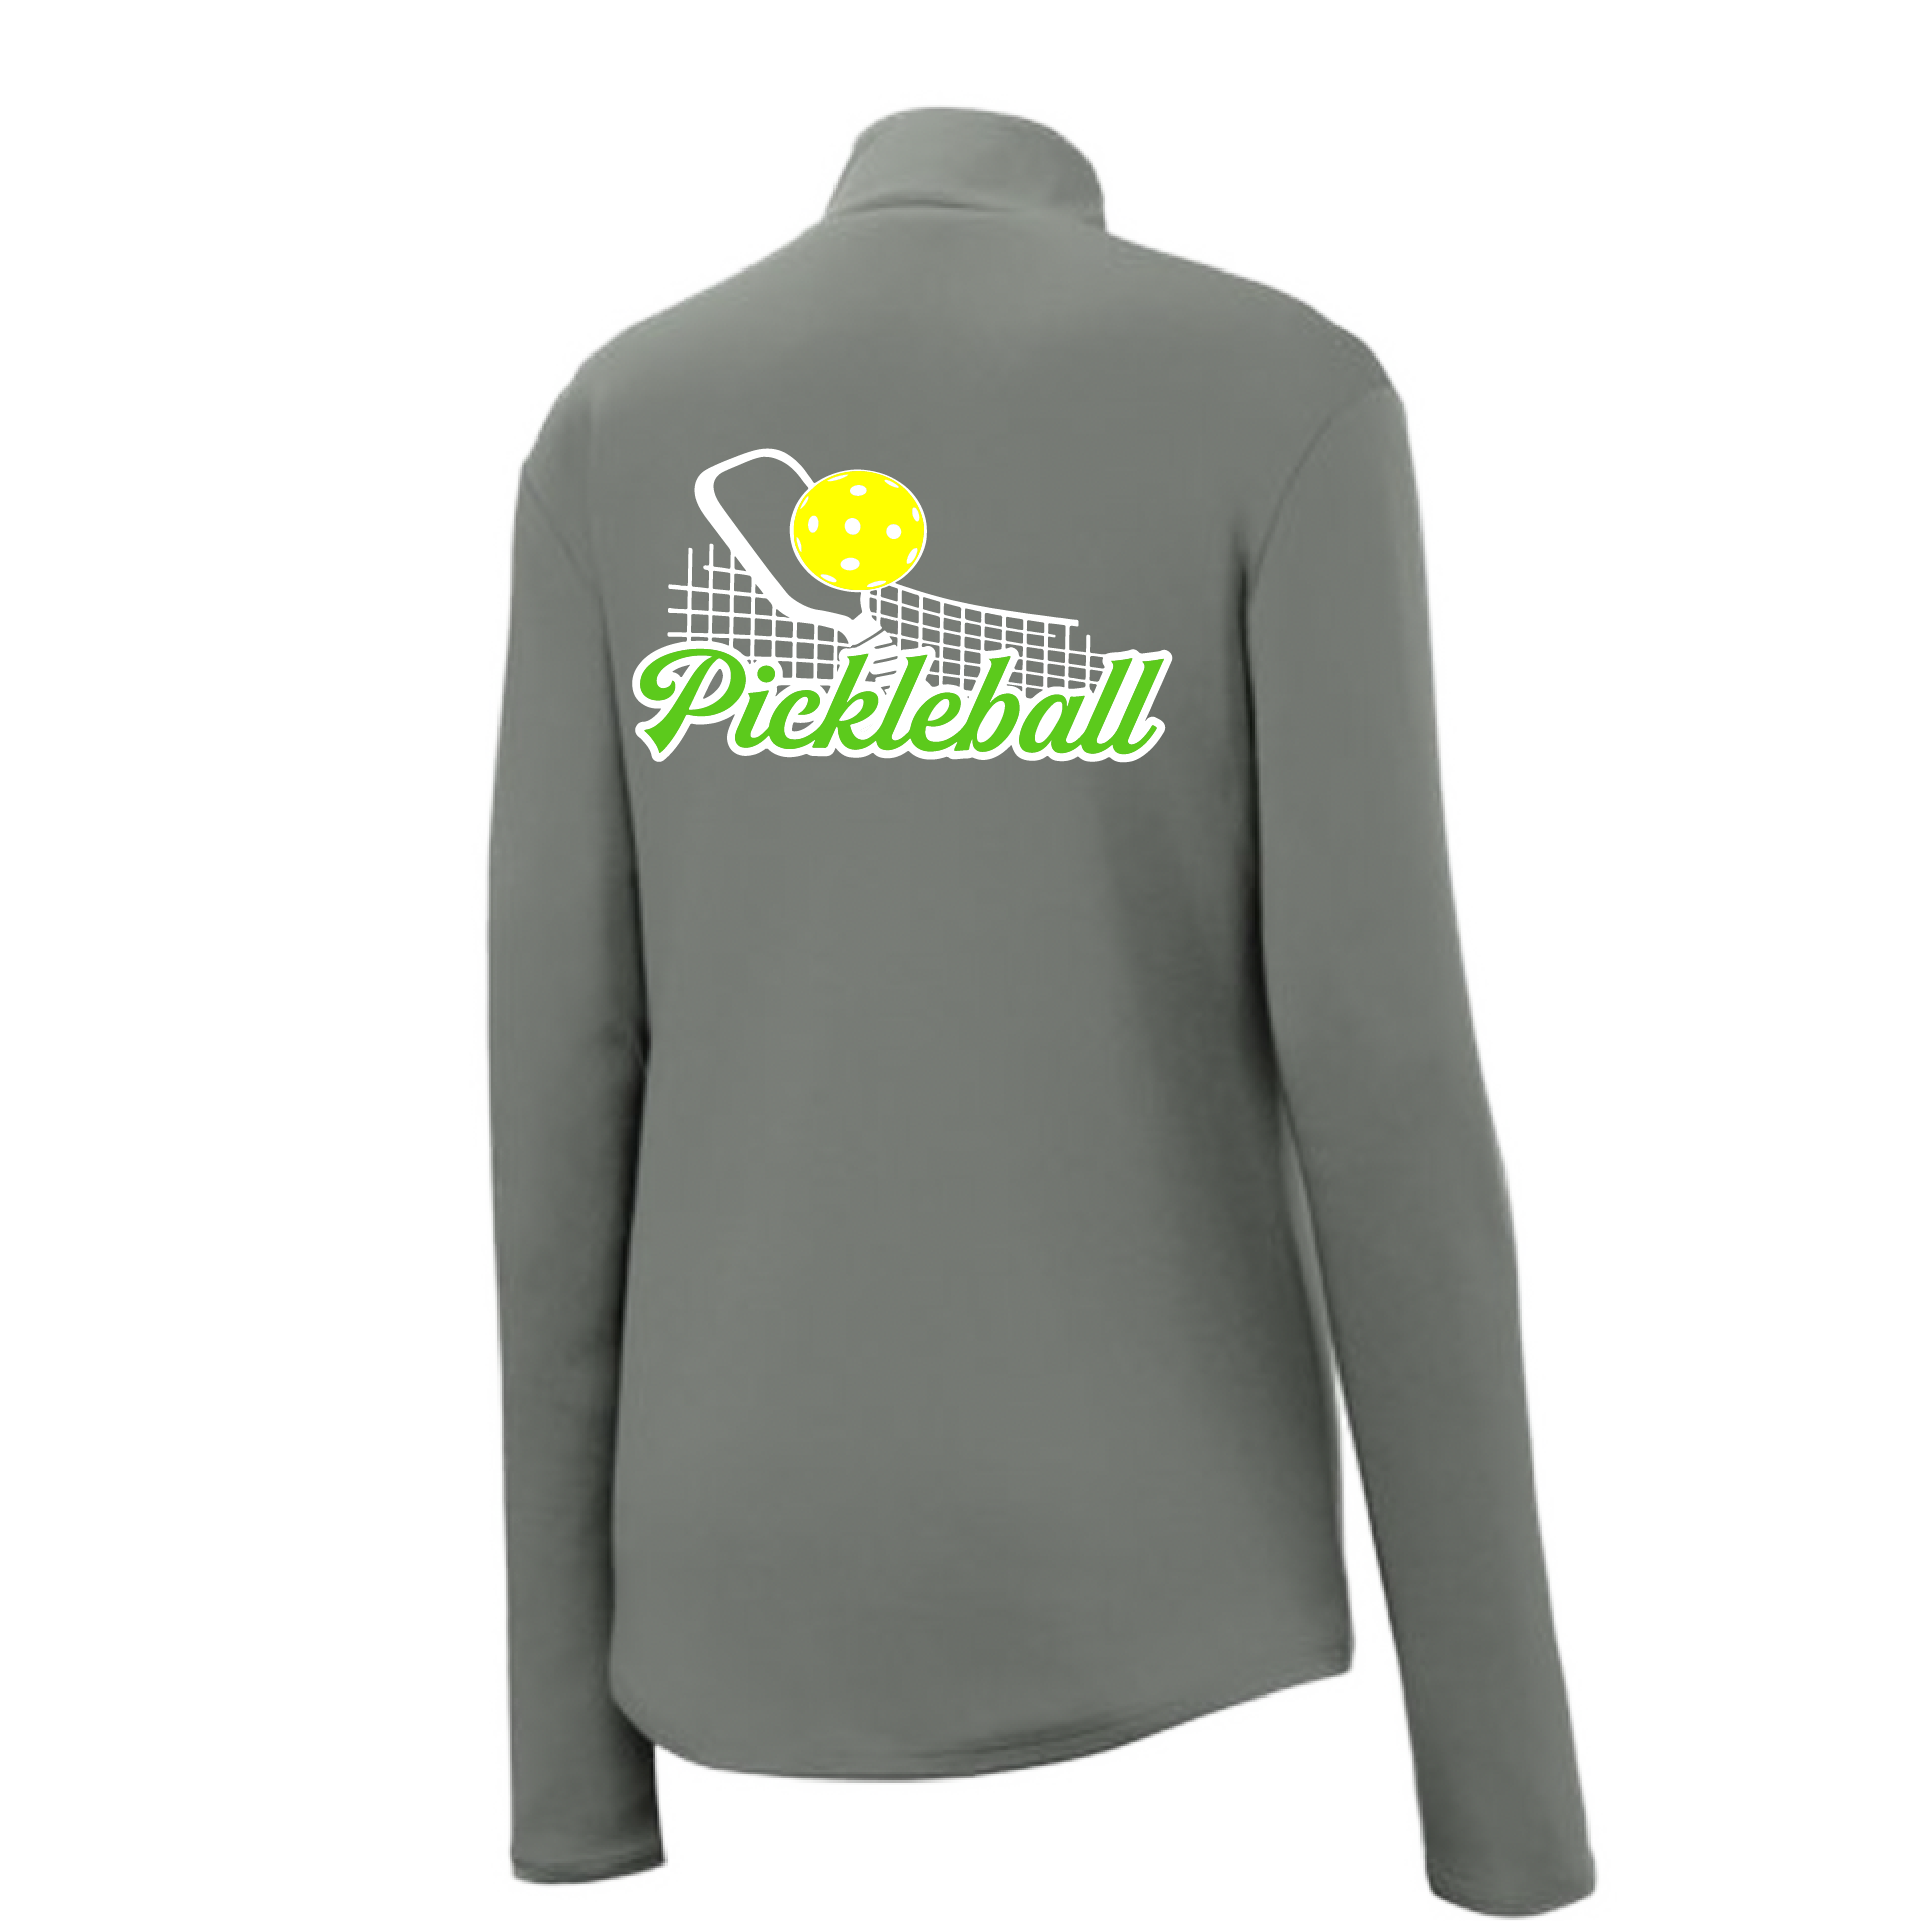 Pickleball Design: Pickleball and Net  Women's 1/4-Zip Pullover: Princess seams and drop tail hem.  Turn up the volume in this Women's shirt with its perfect mix of softness and attitude. Material is ultra-comfortable with moisture wicking properties and tri-blend softness. PosiCharge technology locks in color. Highly breathable and lightweight. Versatile enough for wearing year-round.